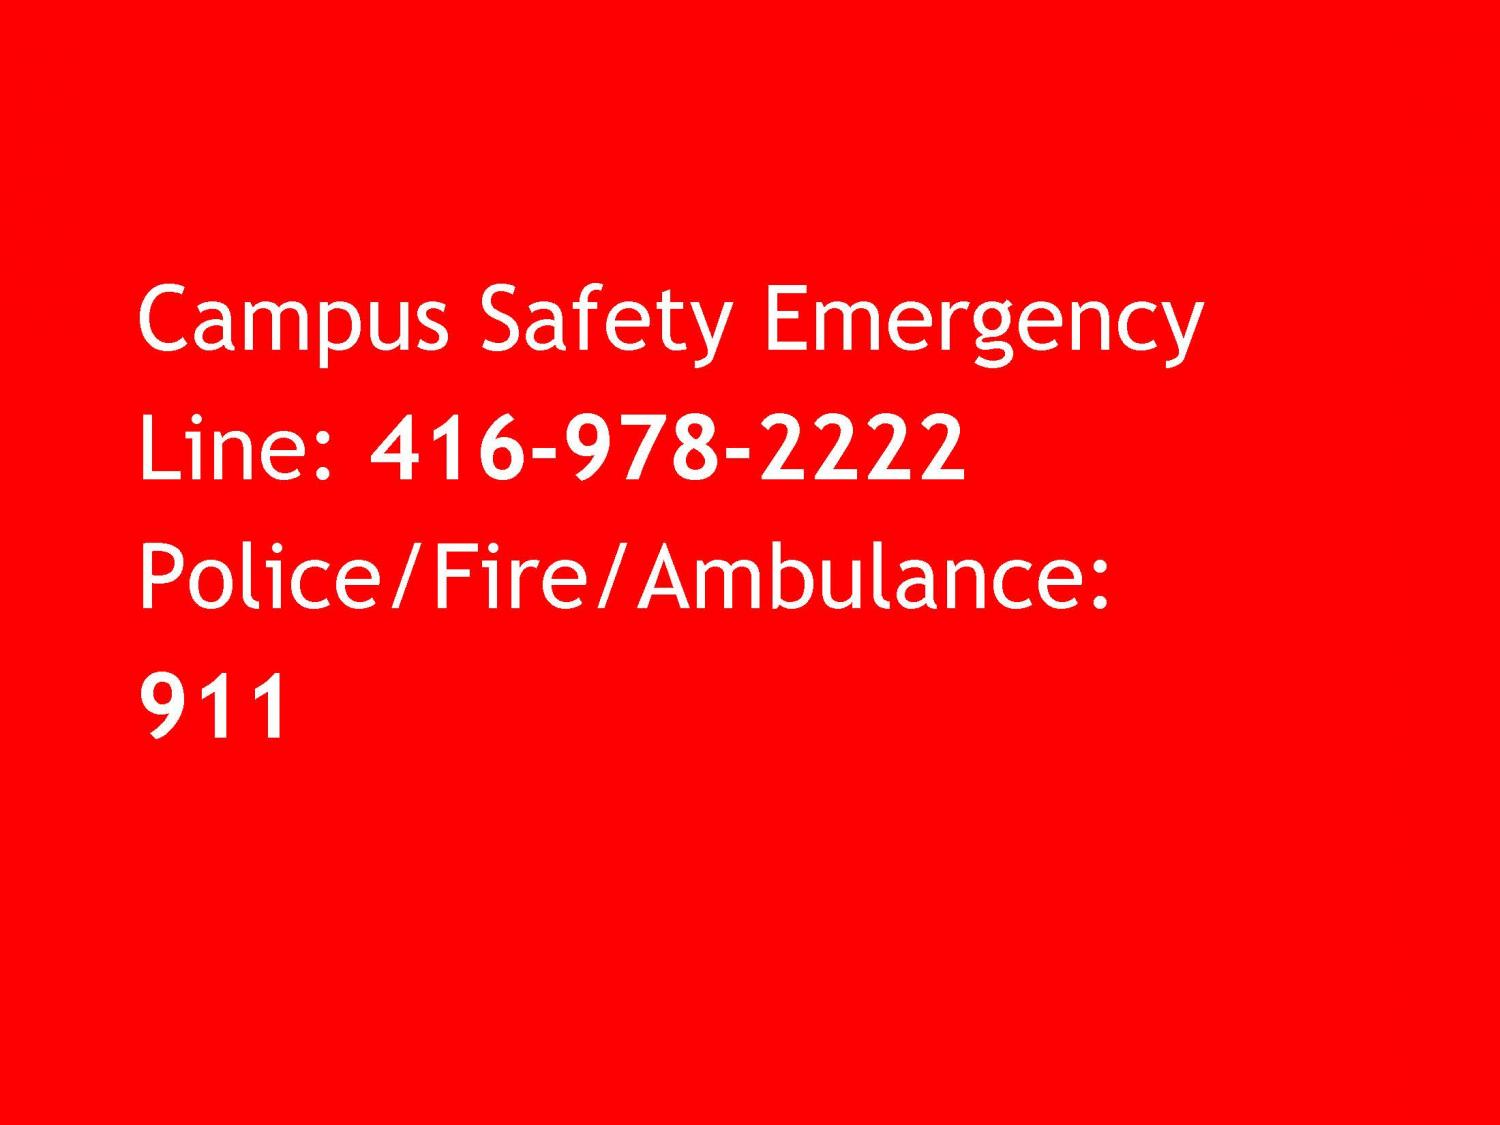 Campus Safety and off campus Emergency numbers